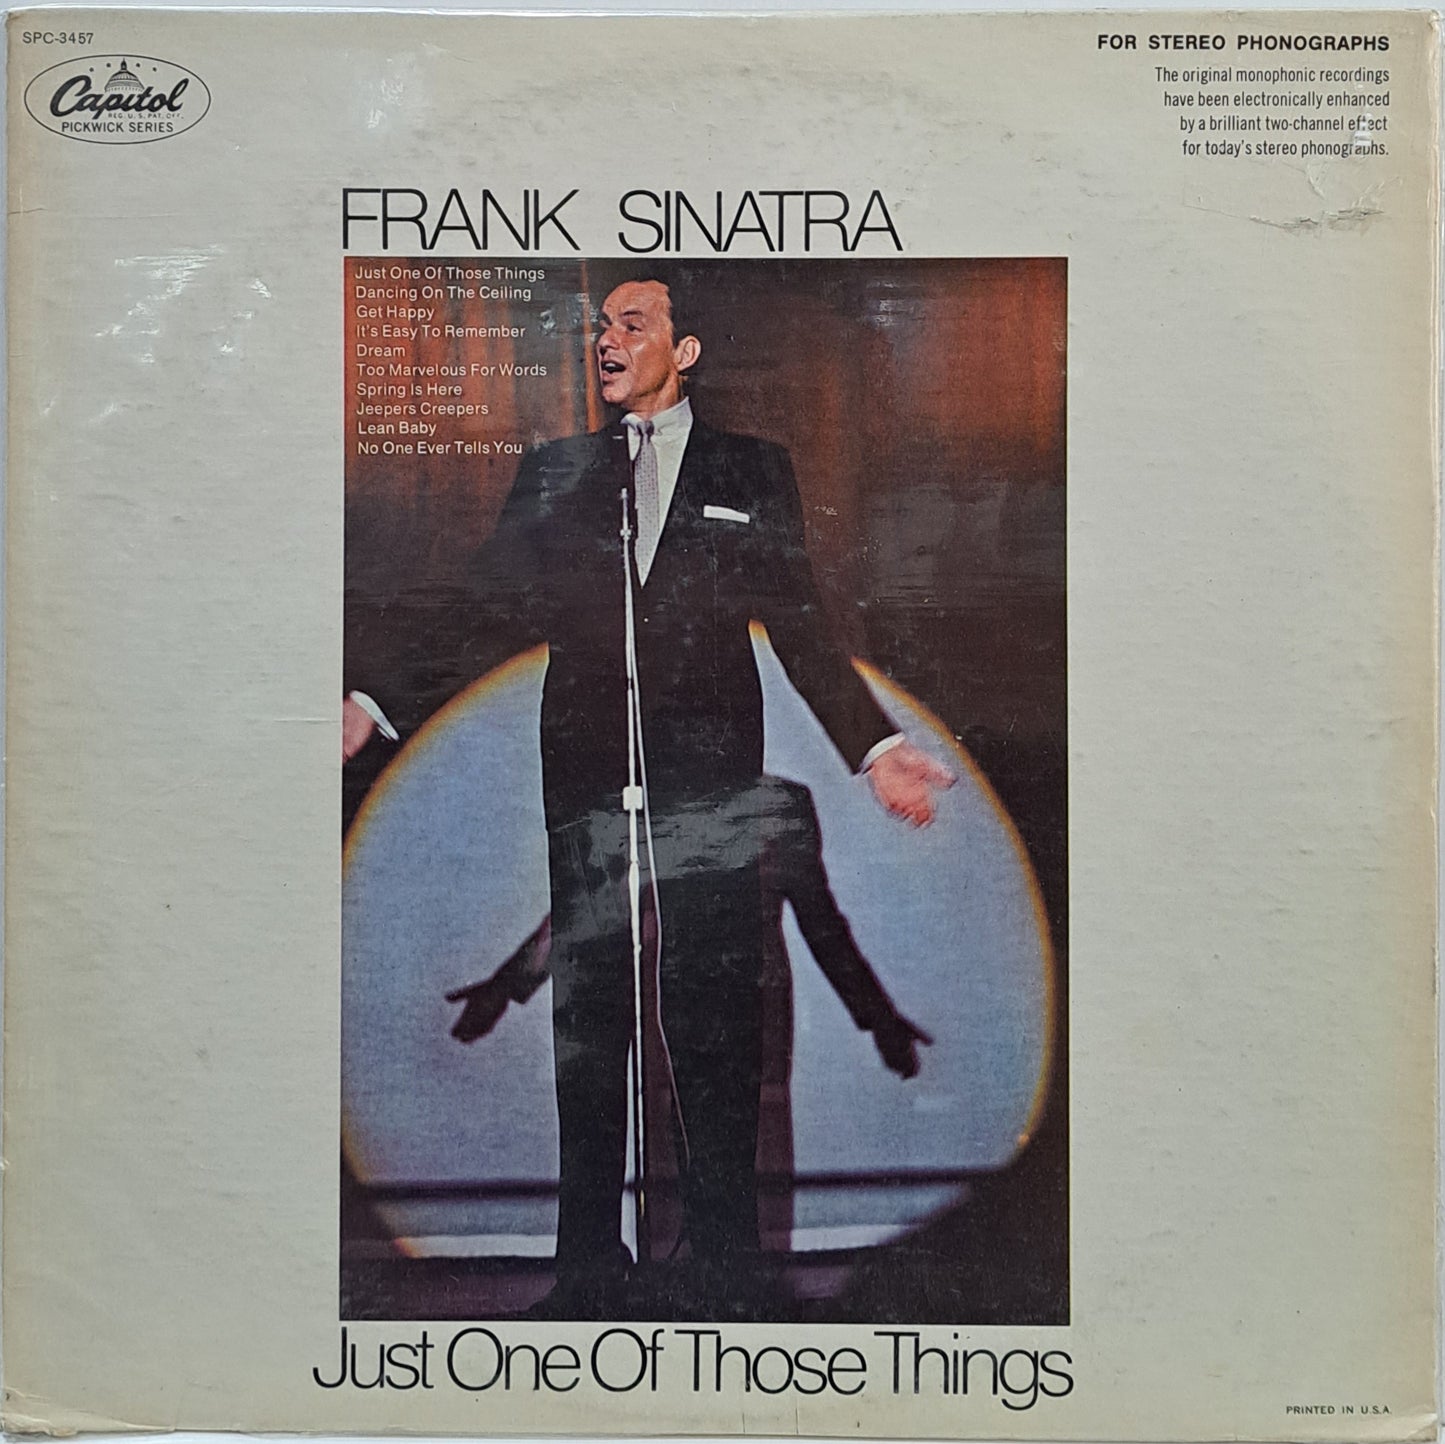 FRANK SINATRA - JUST ONE OF THOSE THINGS LP